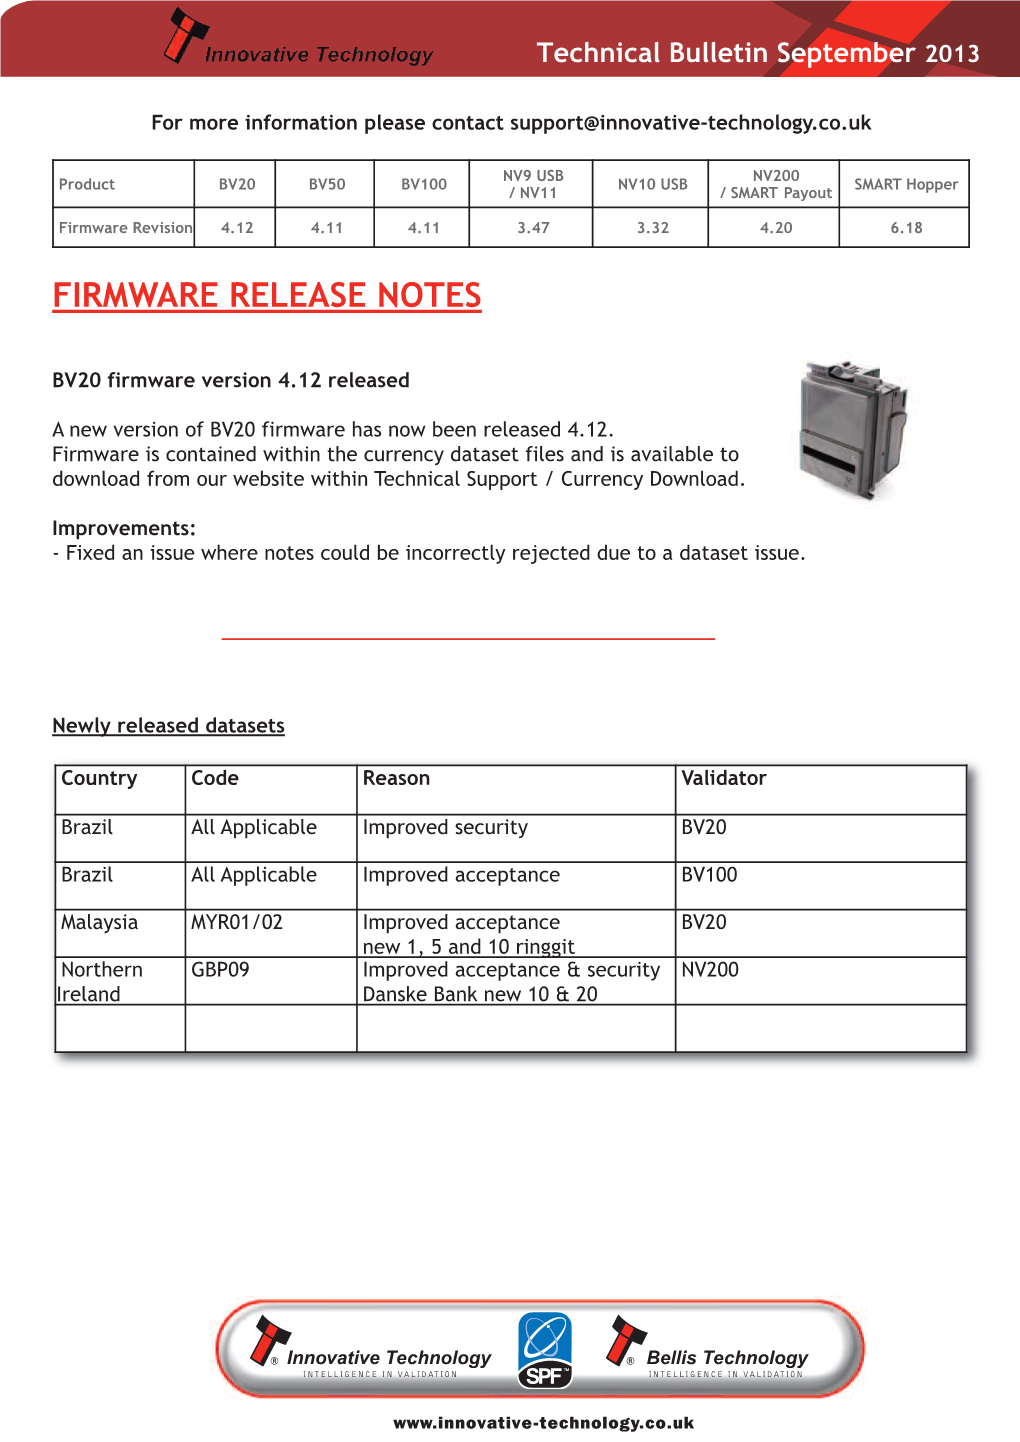 Firmware Release Notes